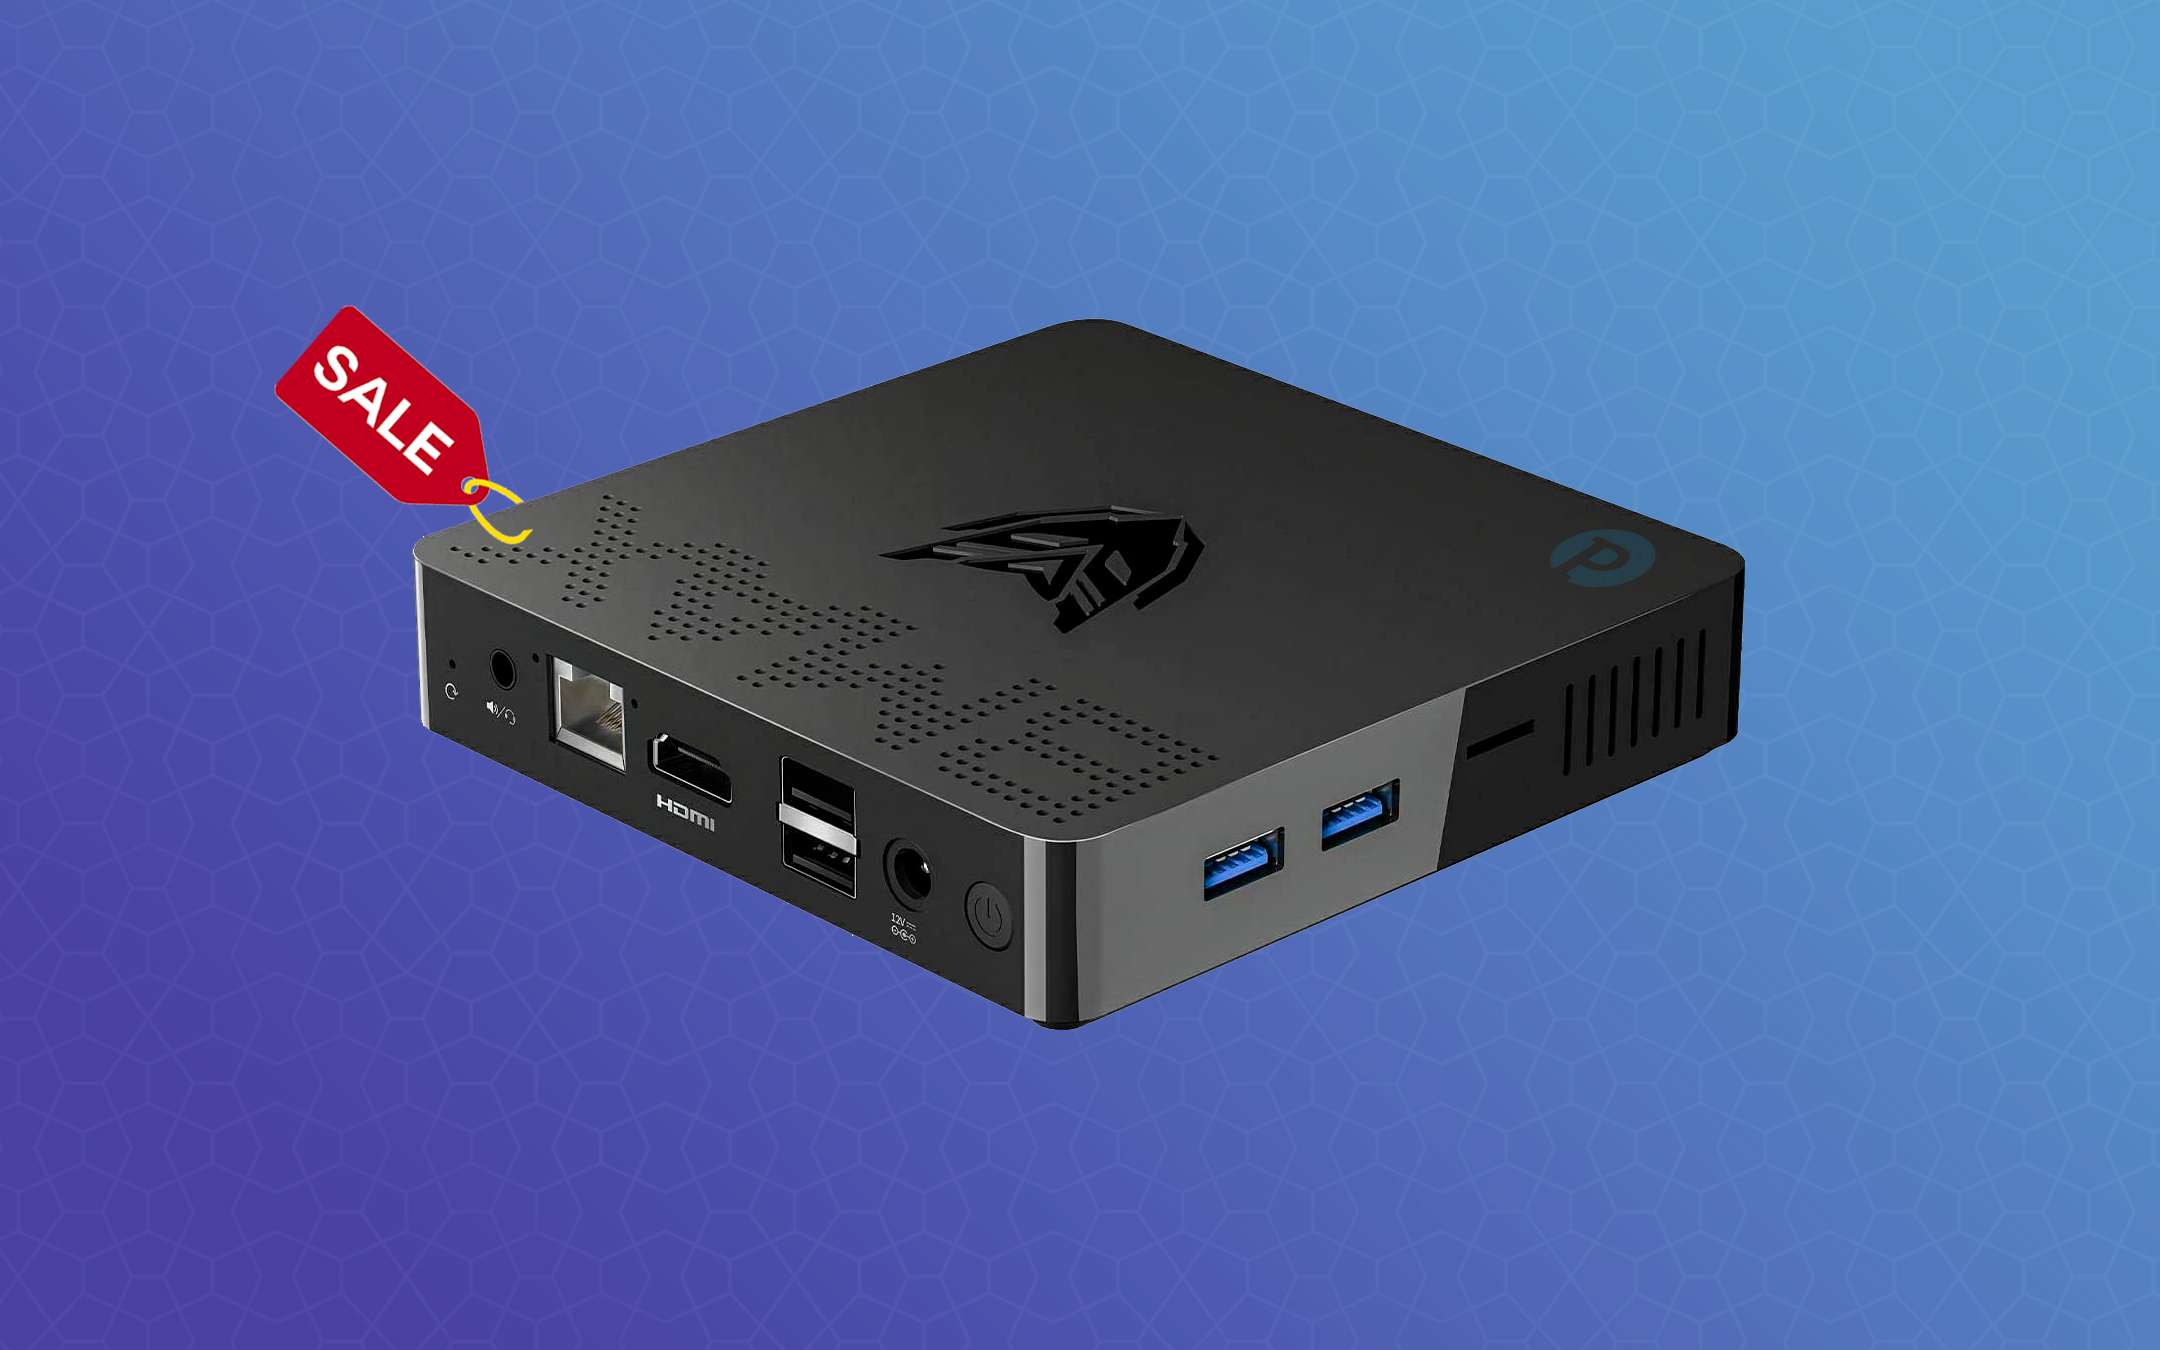 BMAX Mini PC with Windows 10 on offer with this coupon